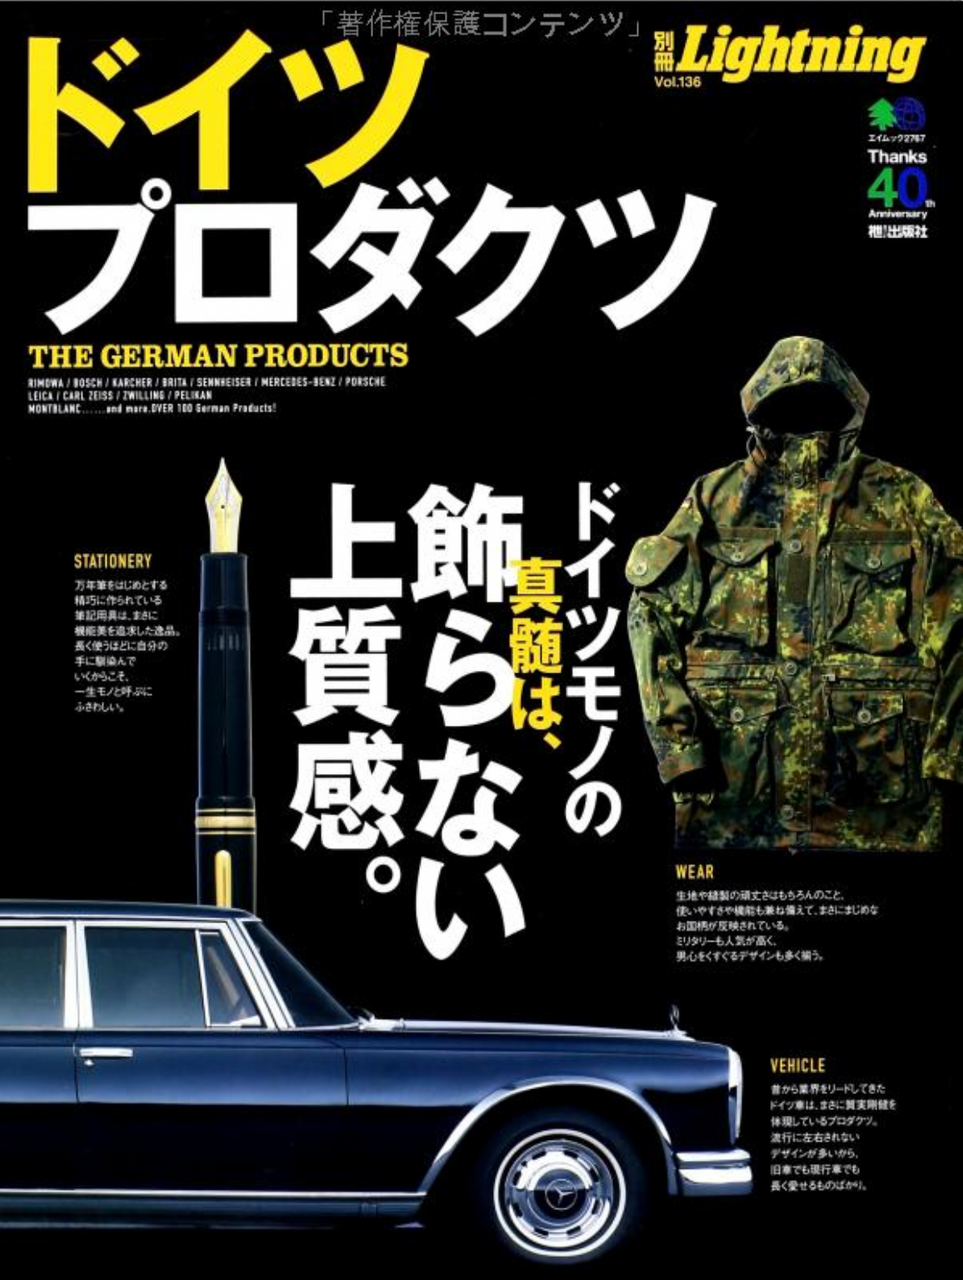 Lightning Vol. 136 “ The German Products ”-Clutch Cafe